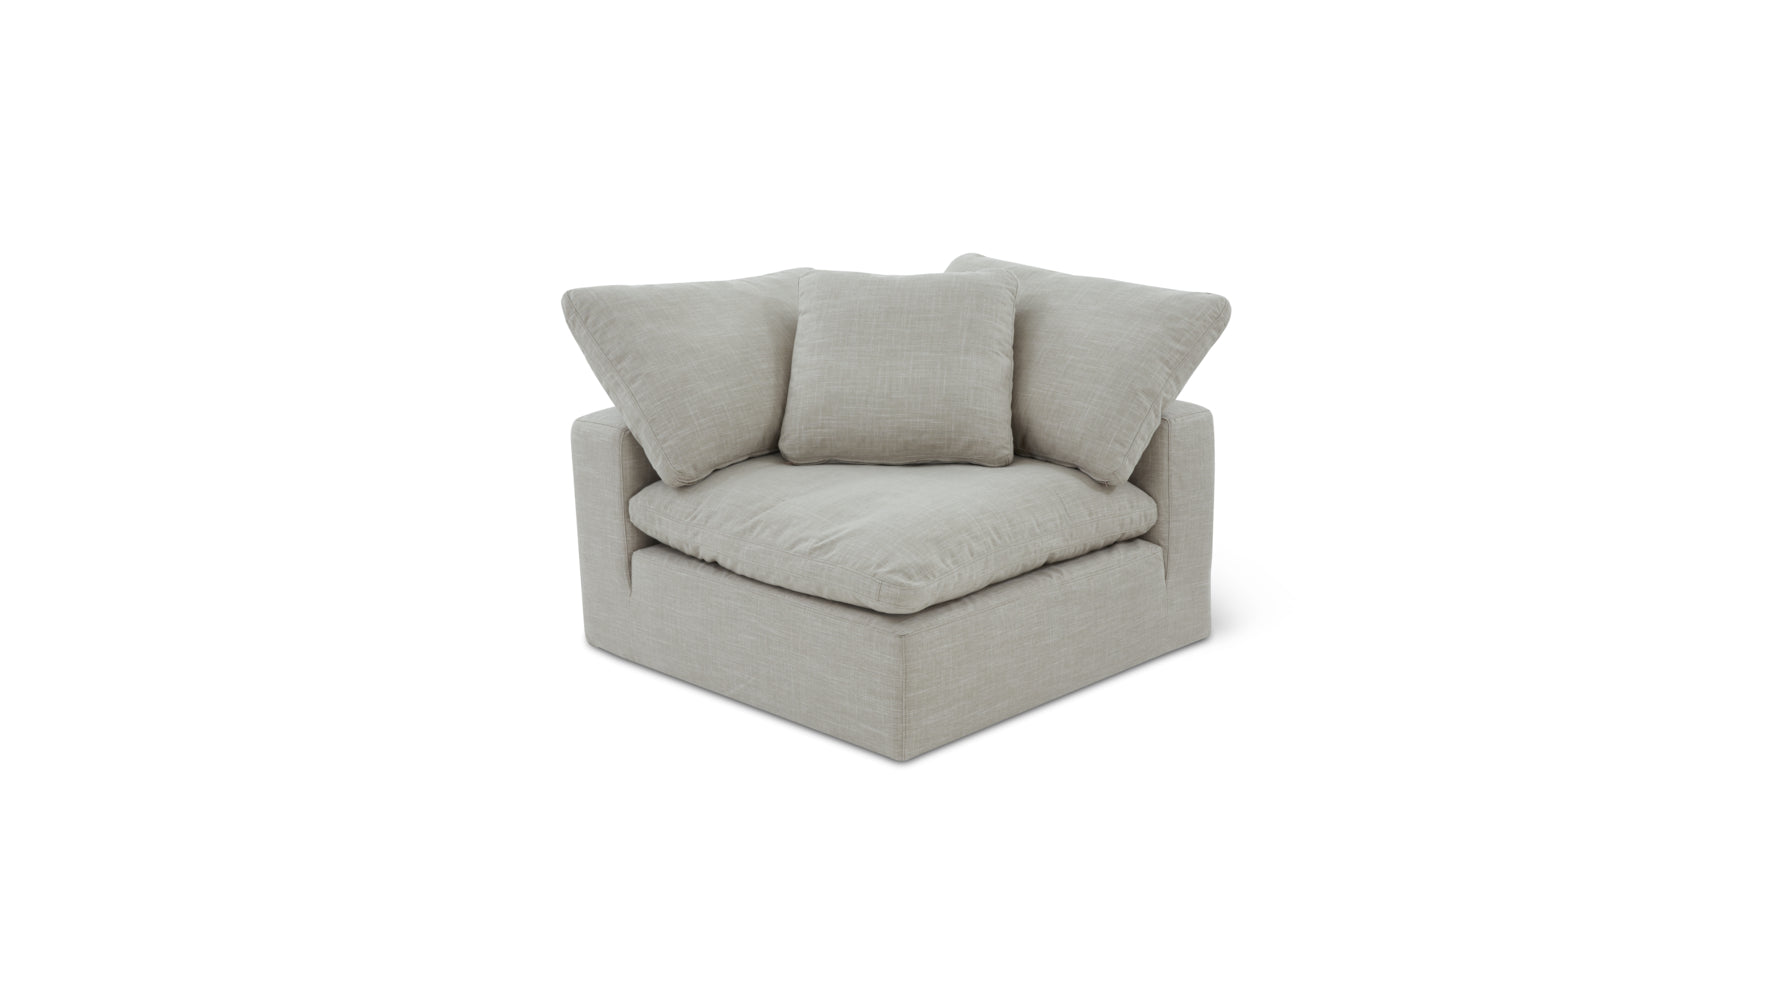 Movie Night™ Corner Chair, Large, Light Pebble (Left or Right) - Image 2